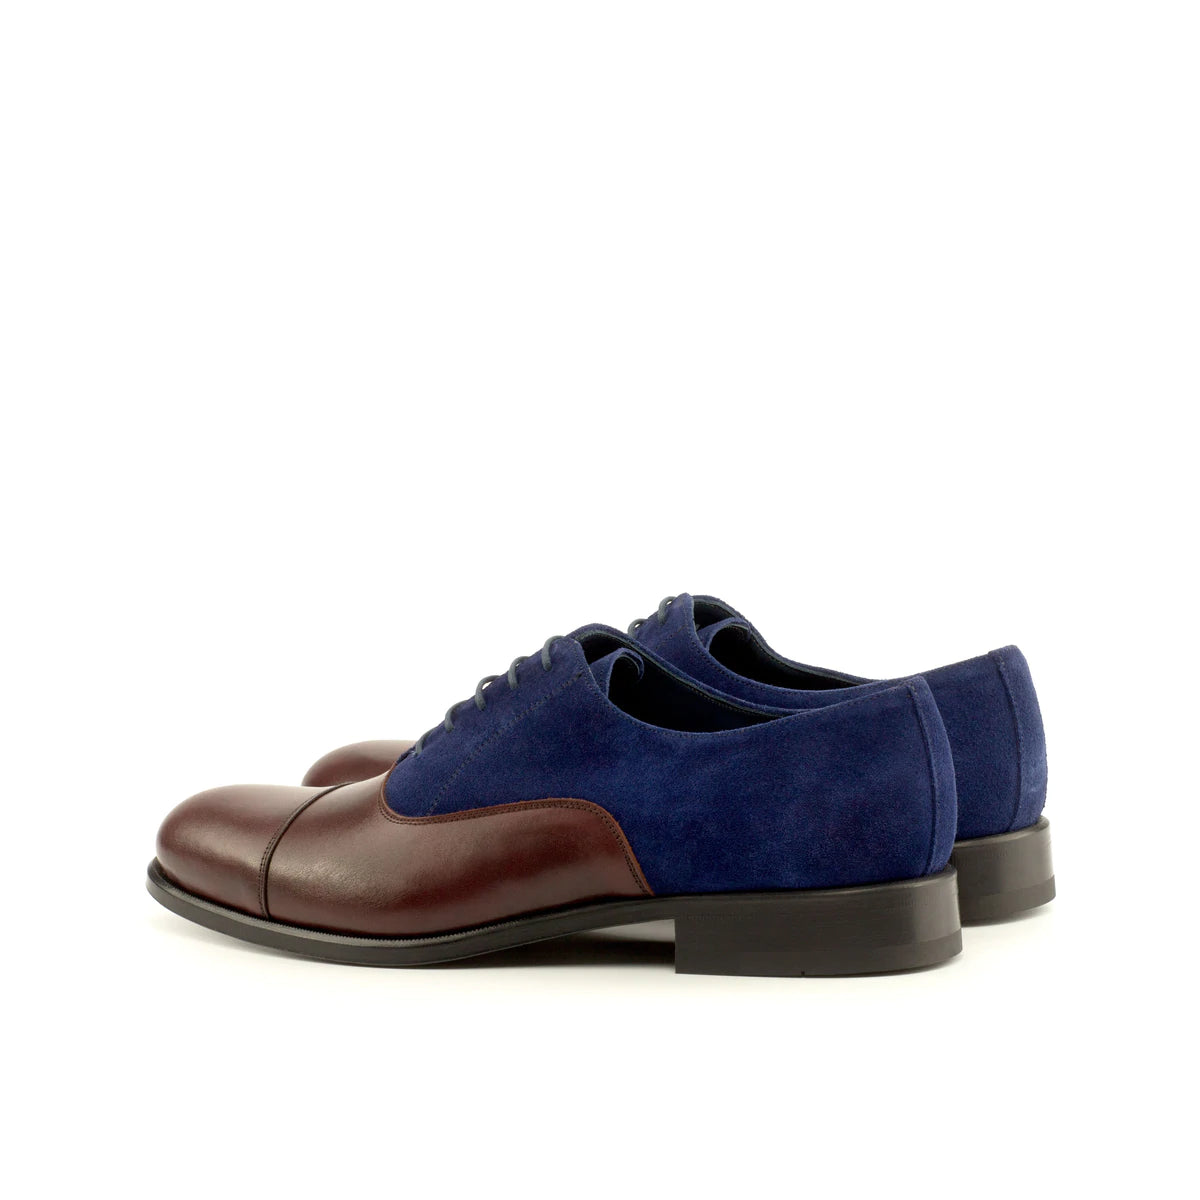 Toe Cap Oxford - Burgundy with Luxury Suede